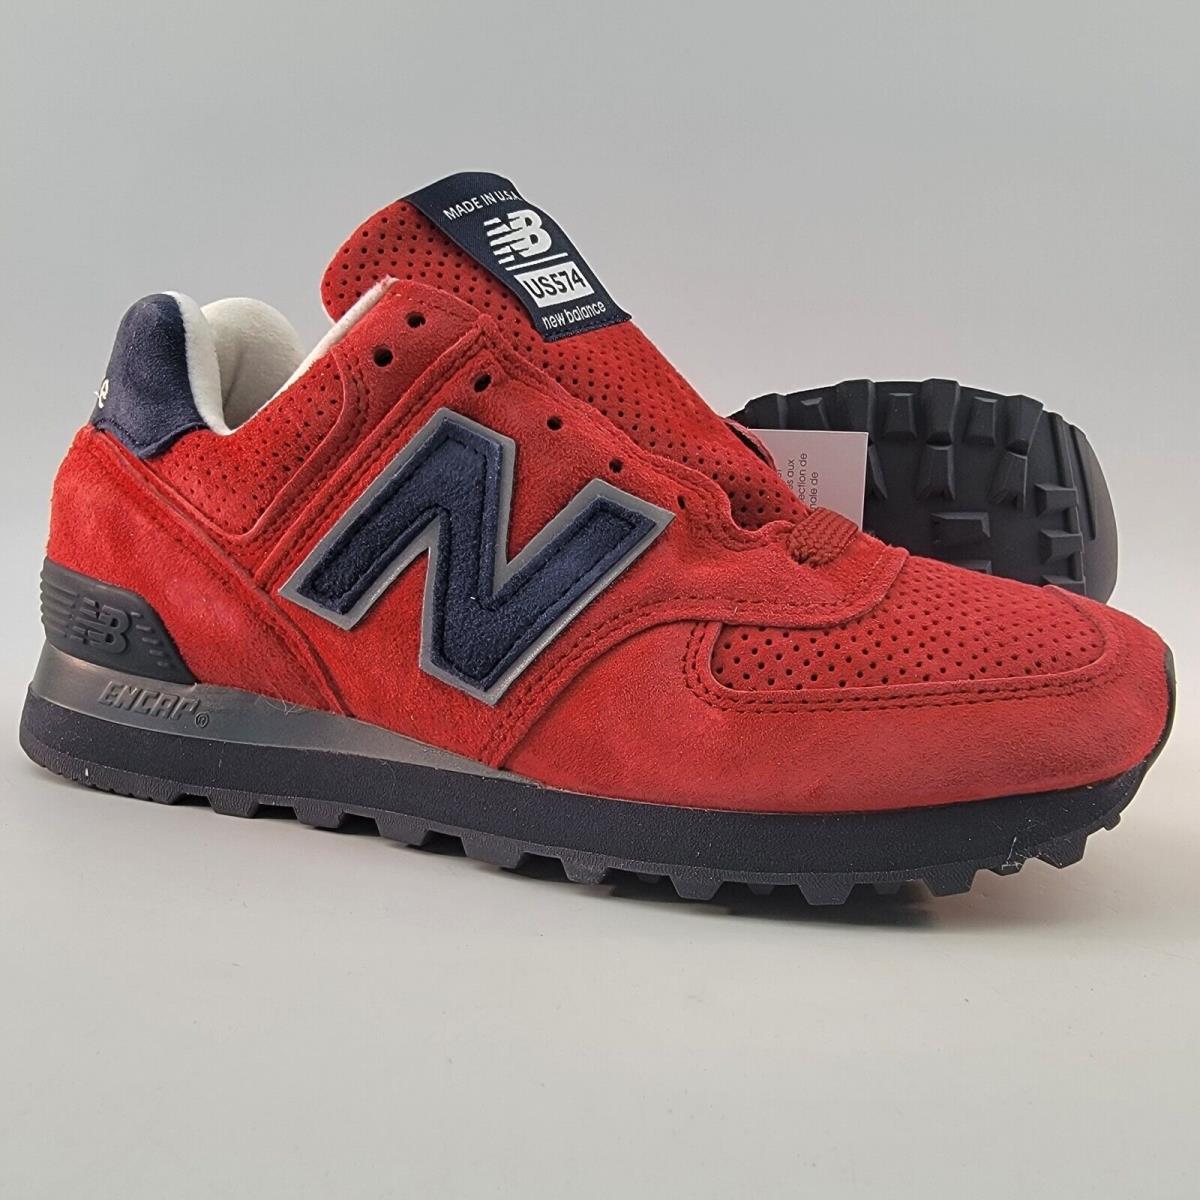 New Balance 574 Made In Usa Running Shoes Red Blue US574XAD Mens 5.5 D US 38 EU